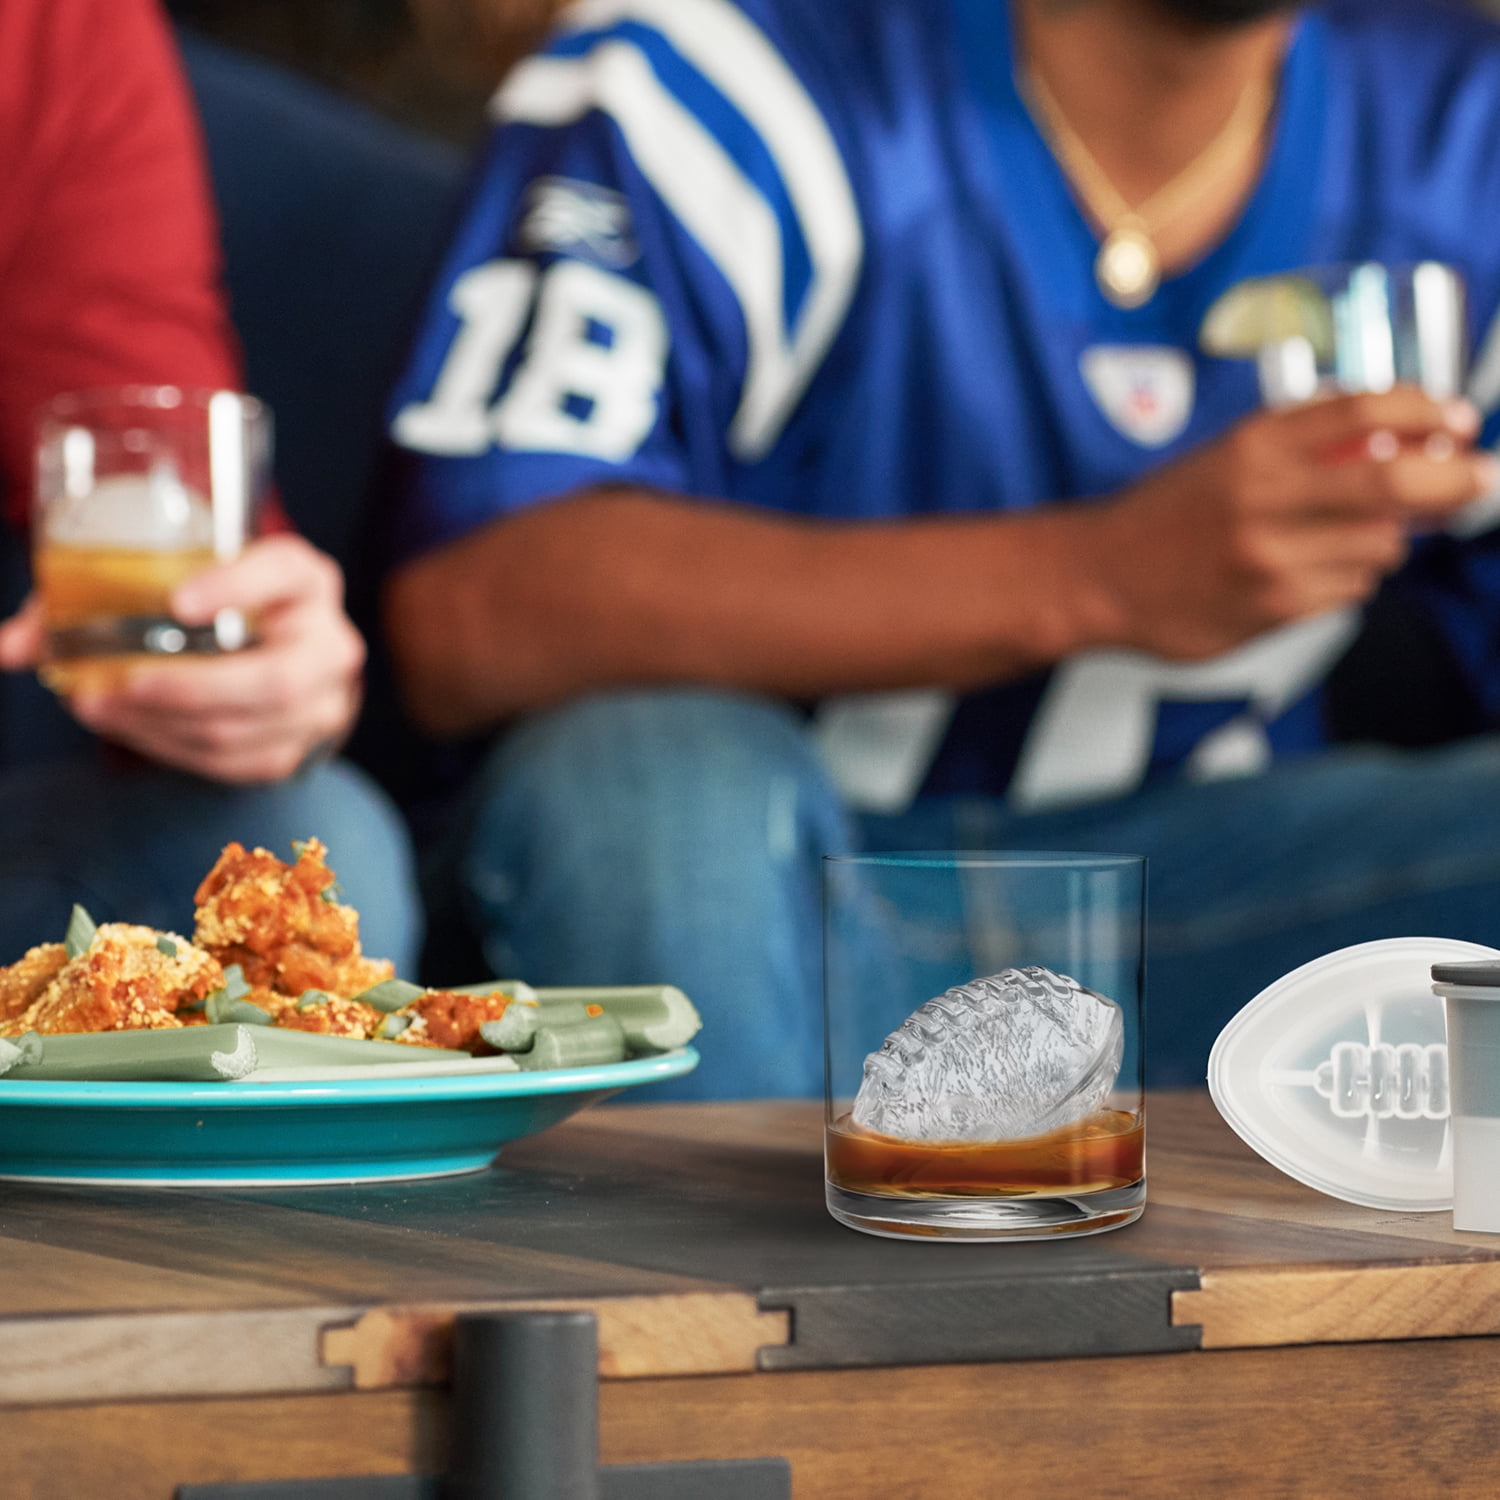 Tovolo Football Ice Cube Mold - Spoons N Spice